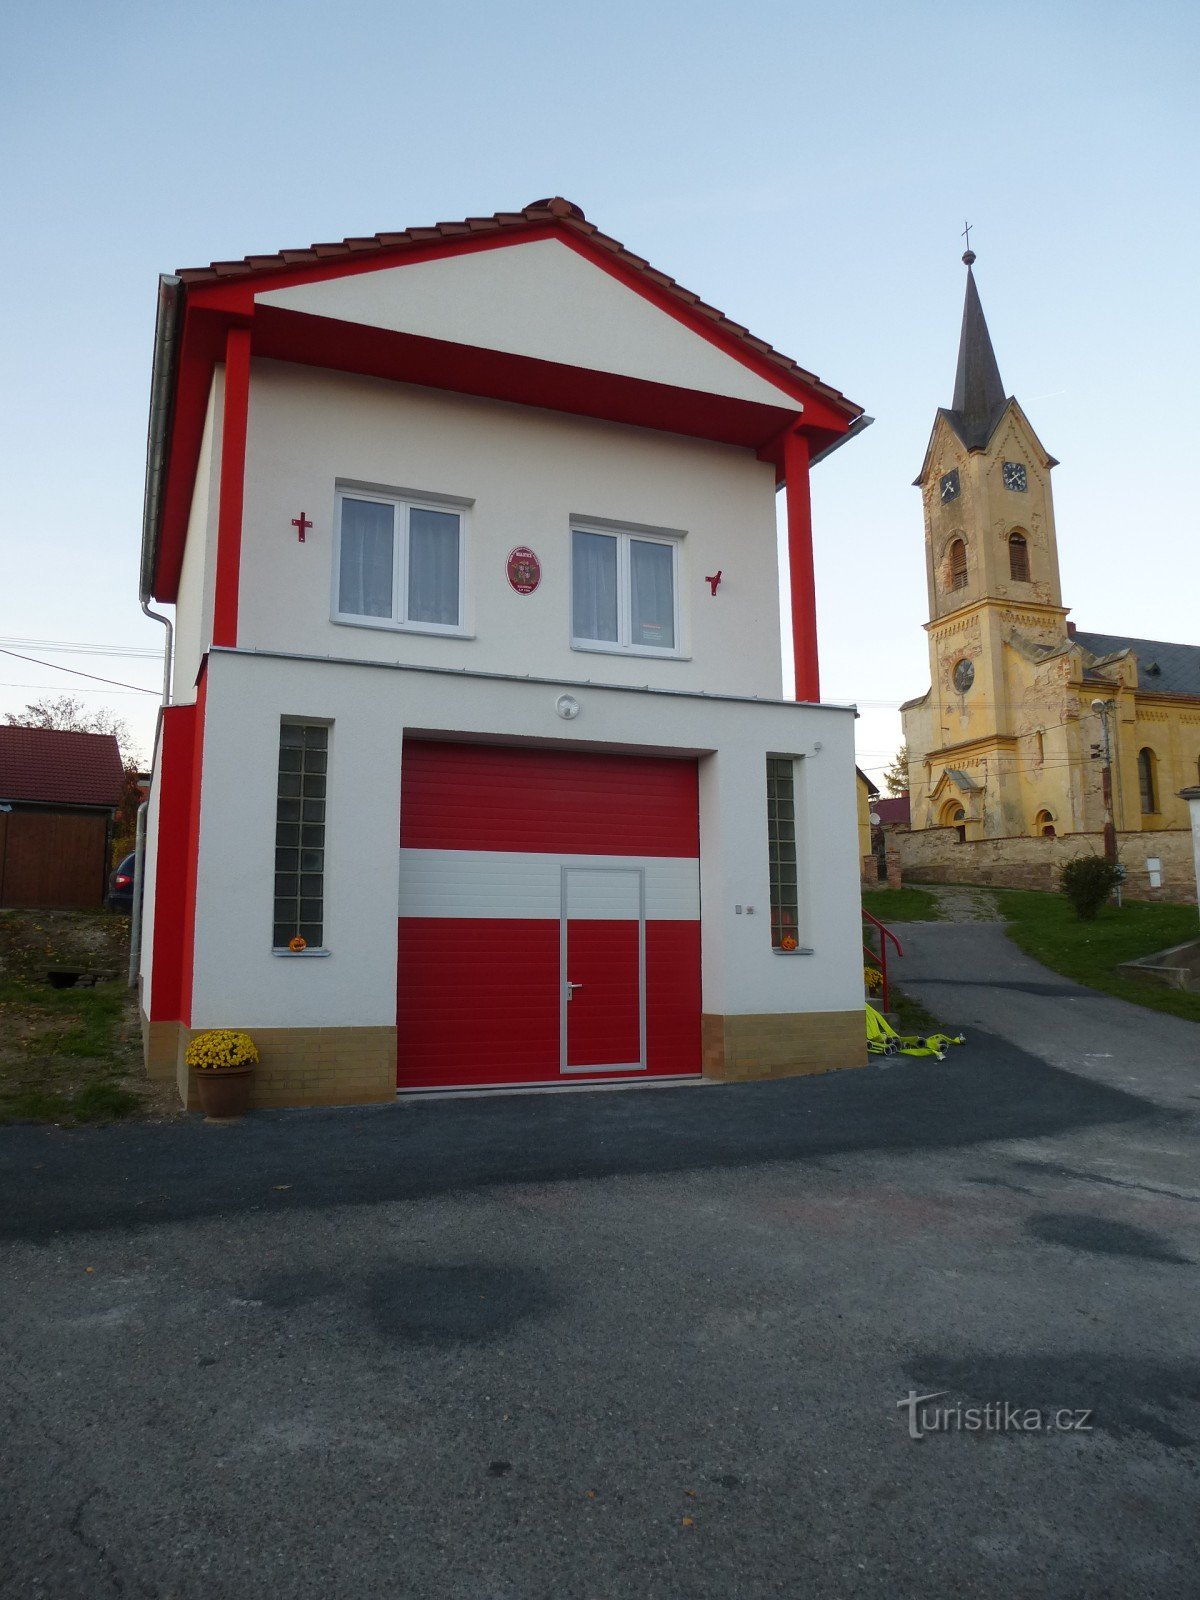 Fire station and church of St. Matthew